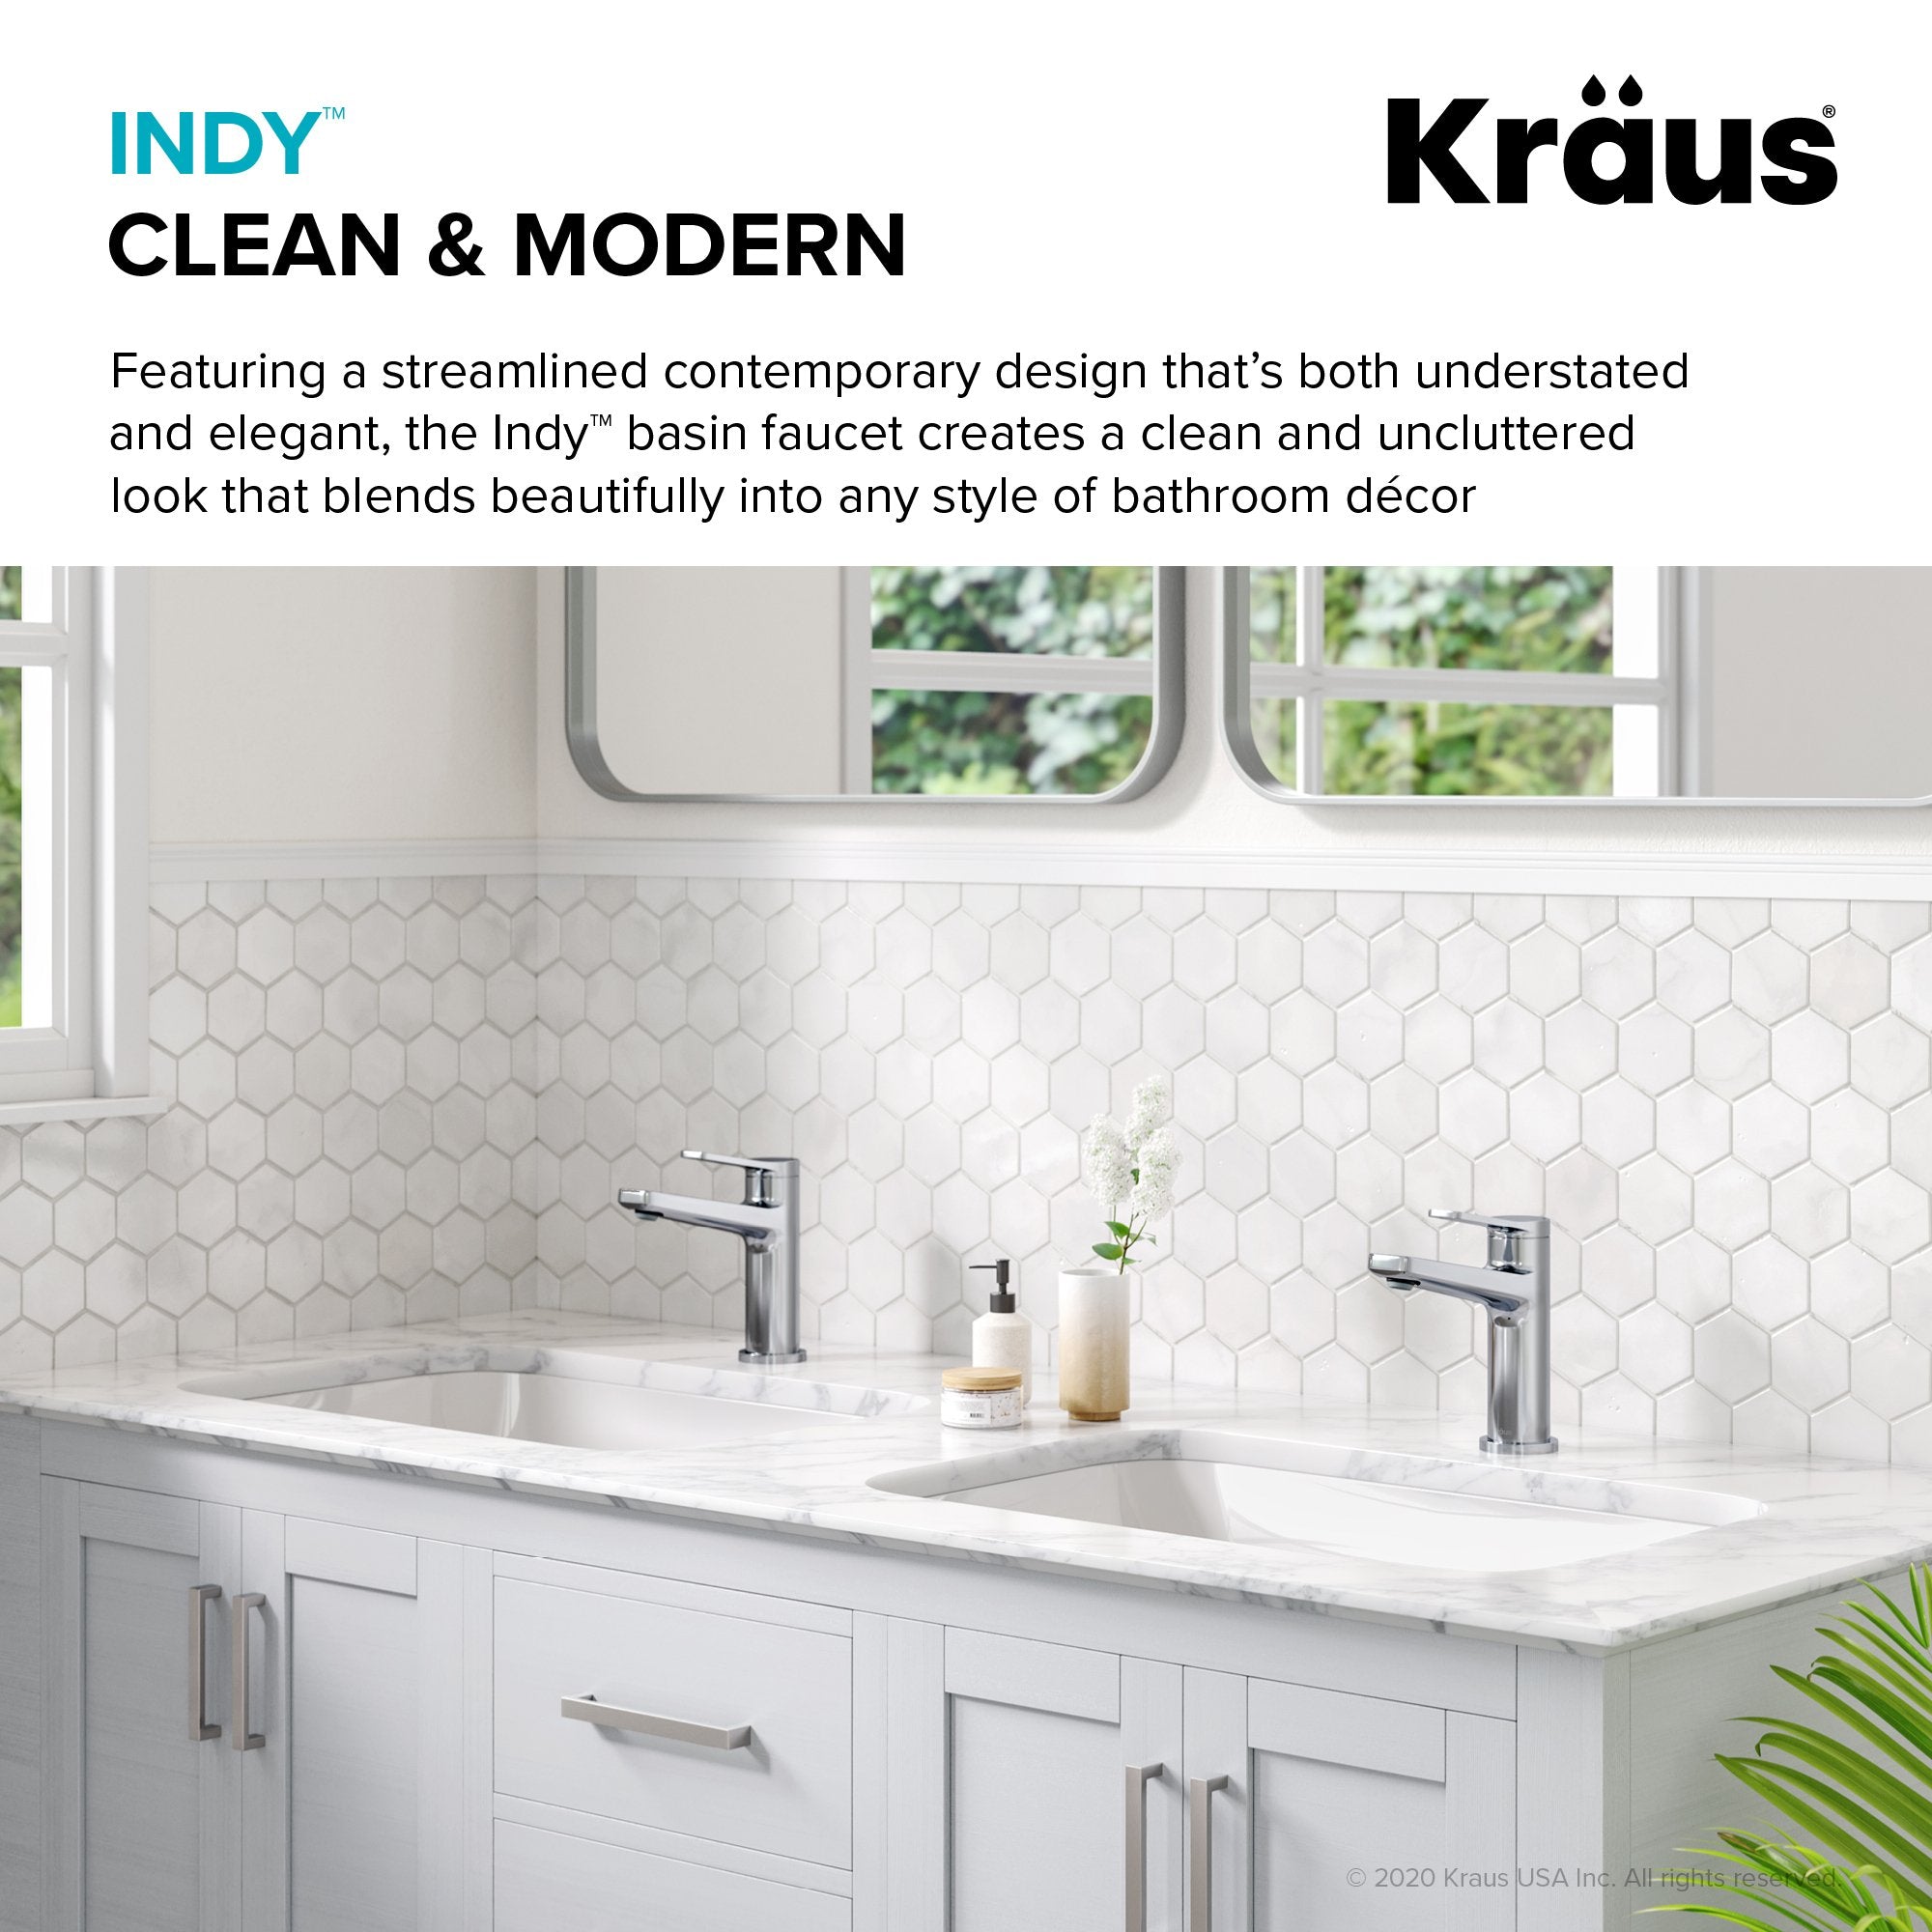 KRAUS Indy Single Handle Bathroom Faucet with Matching Pop-Up Drain in Chrome KBF-1401CH-PU-11CH | DirectSinks